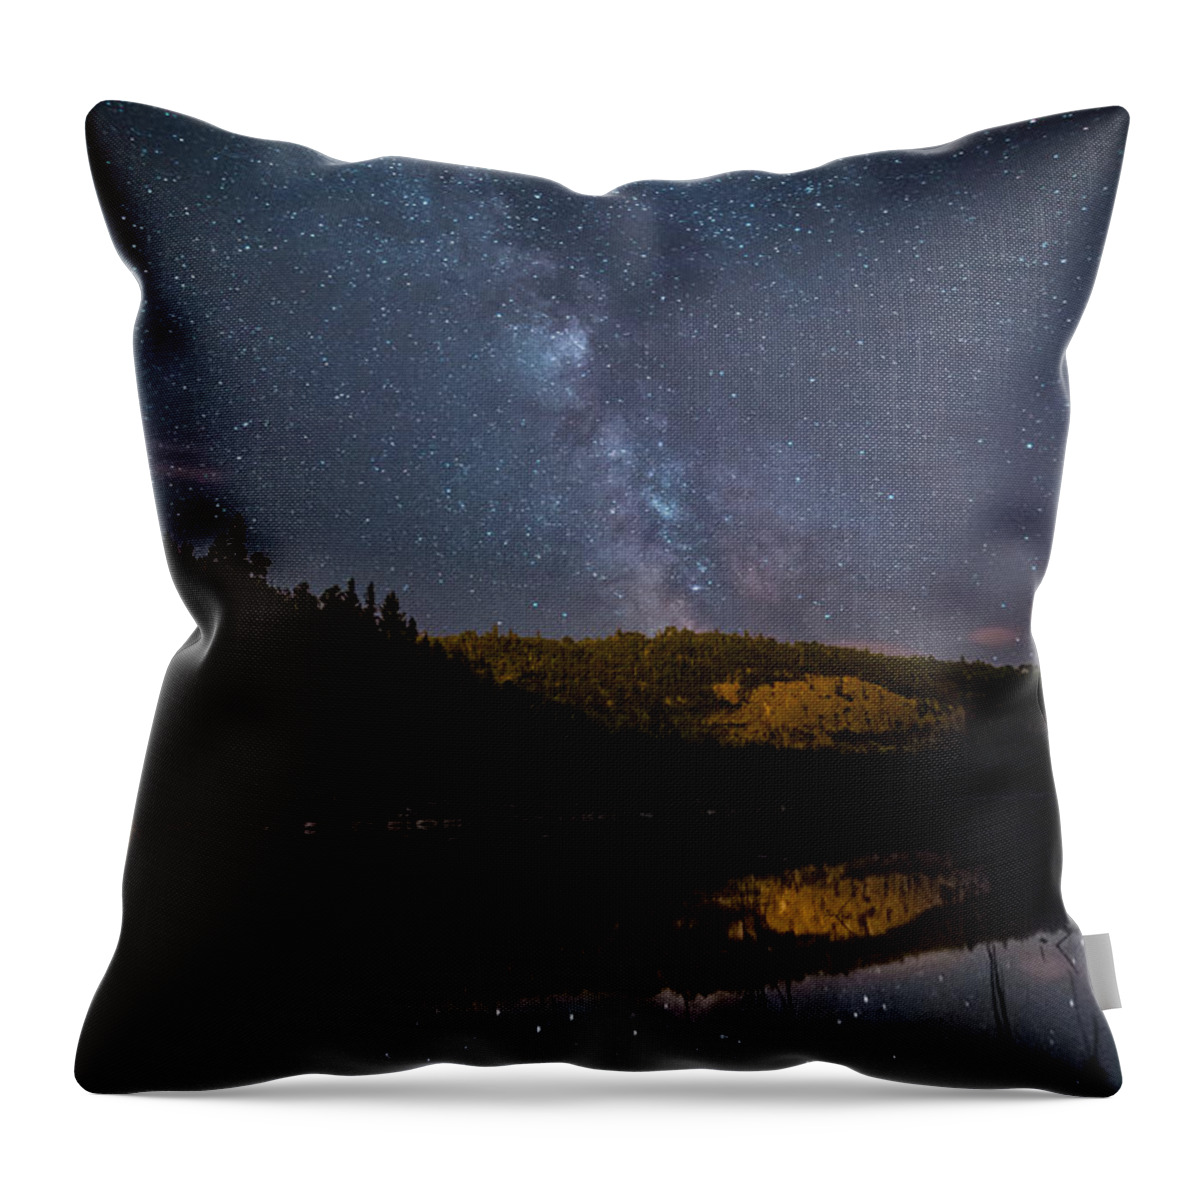 Astrophotography Throw Pillow featuring the photograph Crescent Lake Midnight by Jakub Sisak